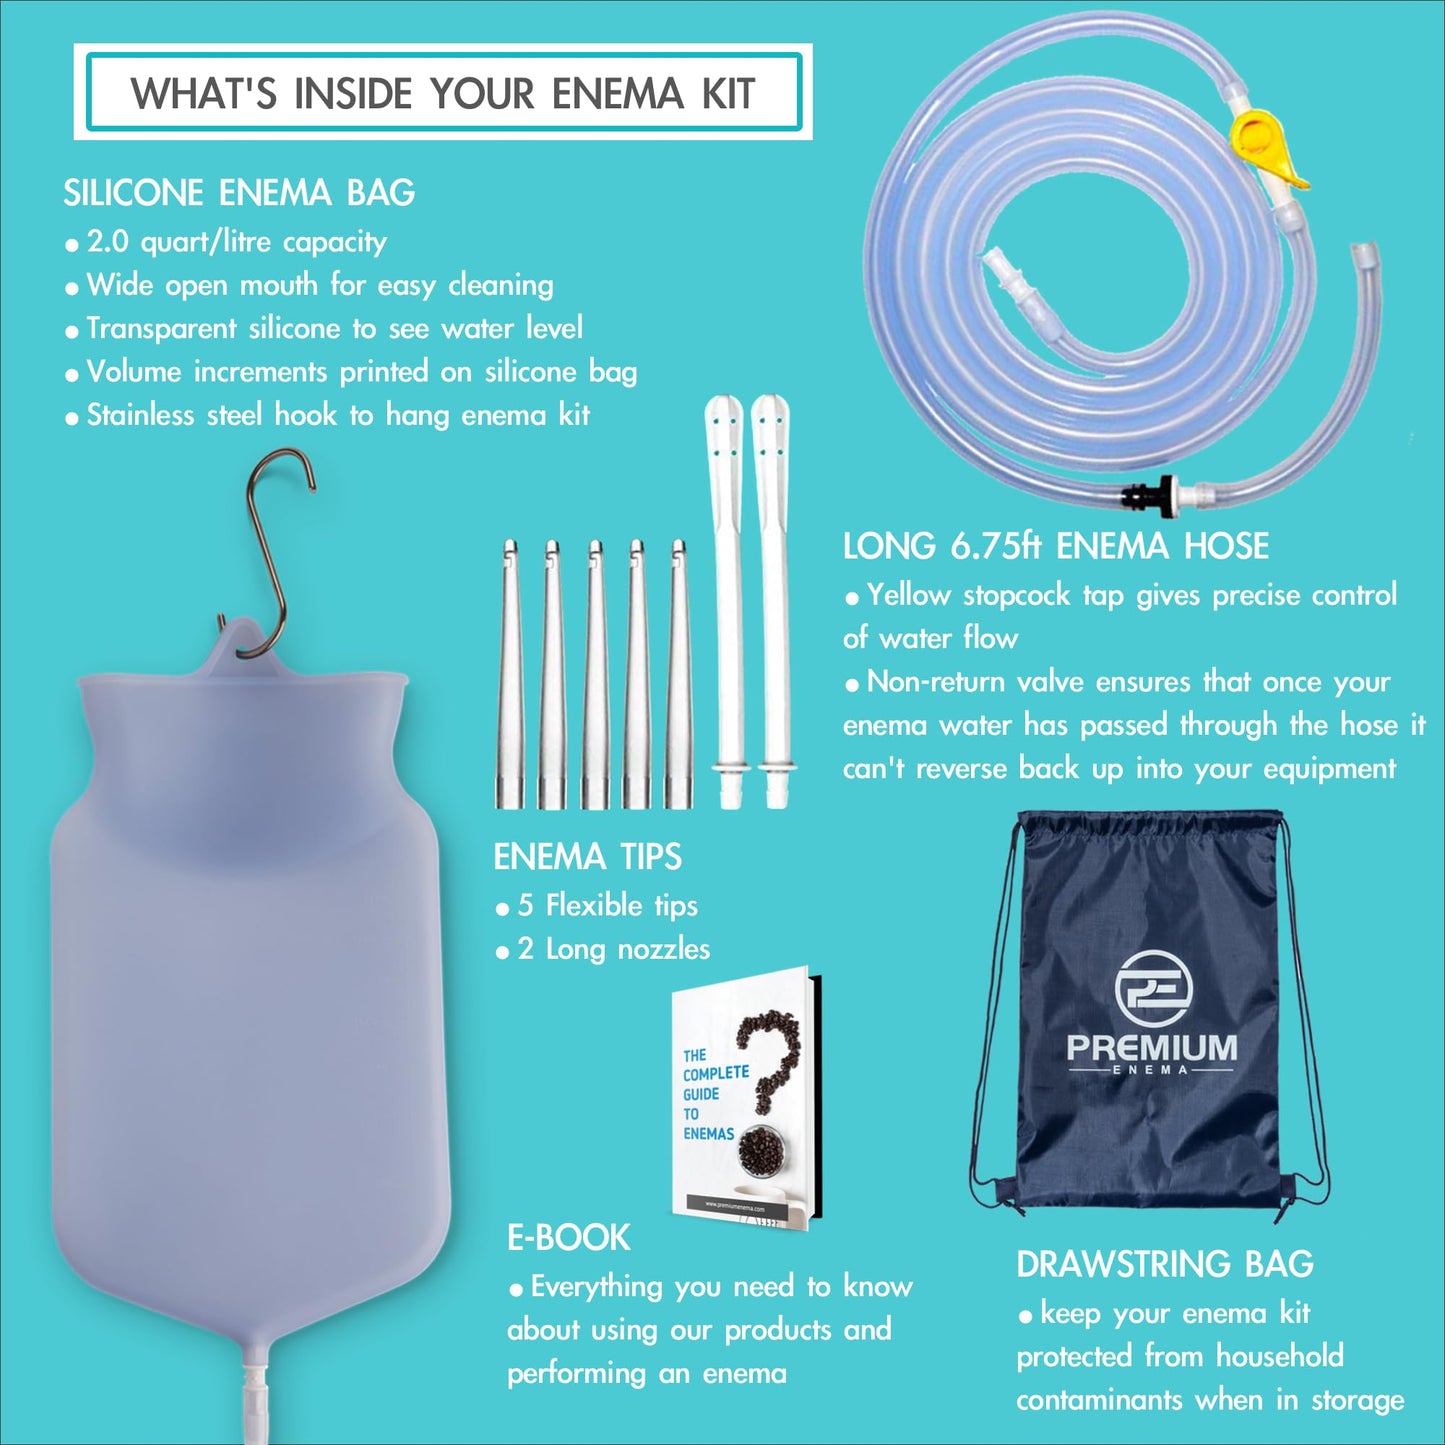 PE Clear Silicone Enema Bag Kit. Suitable for Coffee and Water Colon Cleansing. 2 Quart Capacity, 6.75 Foot Long Hose, 7 Tips. by Premium Enema